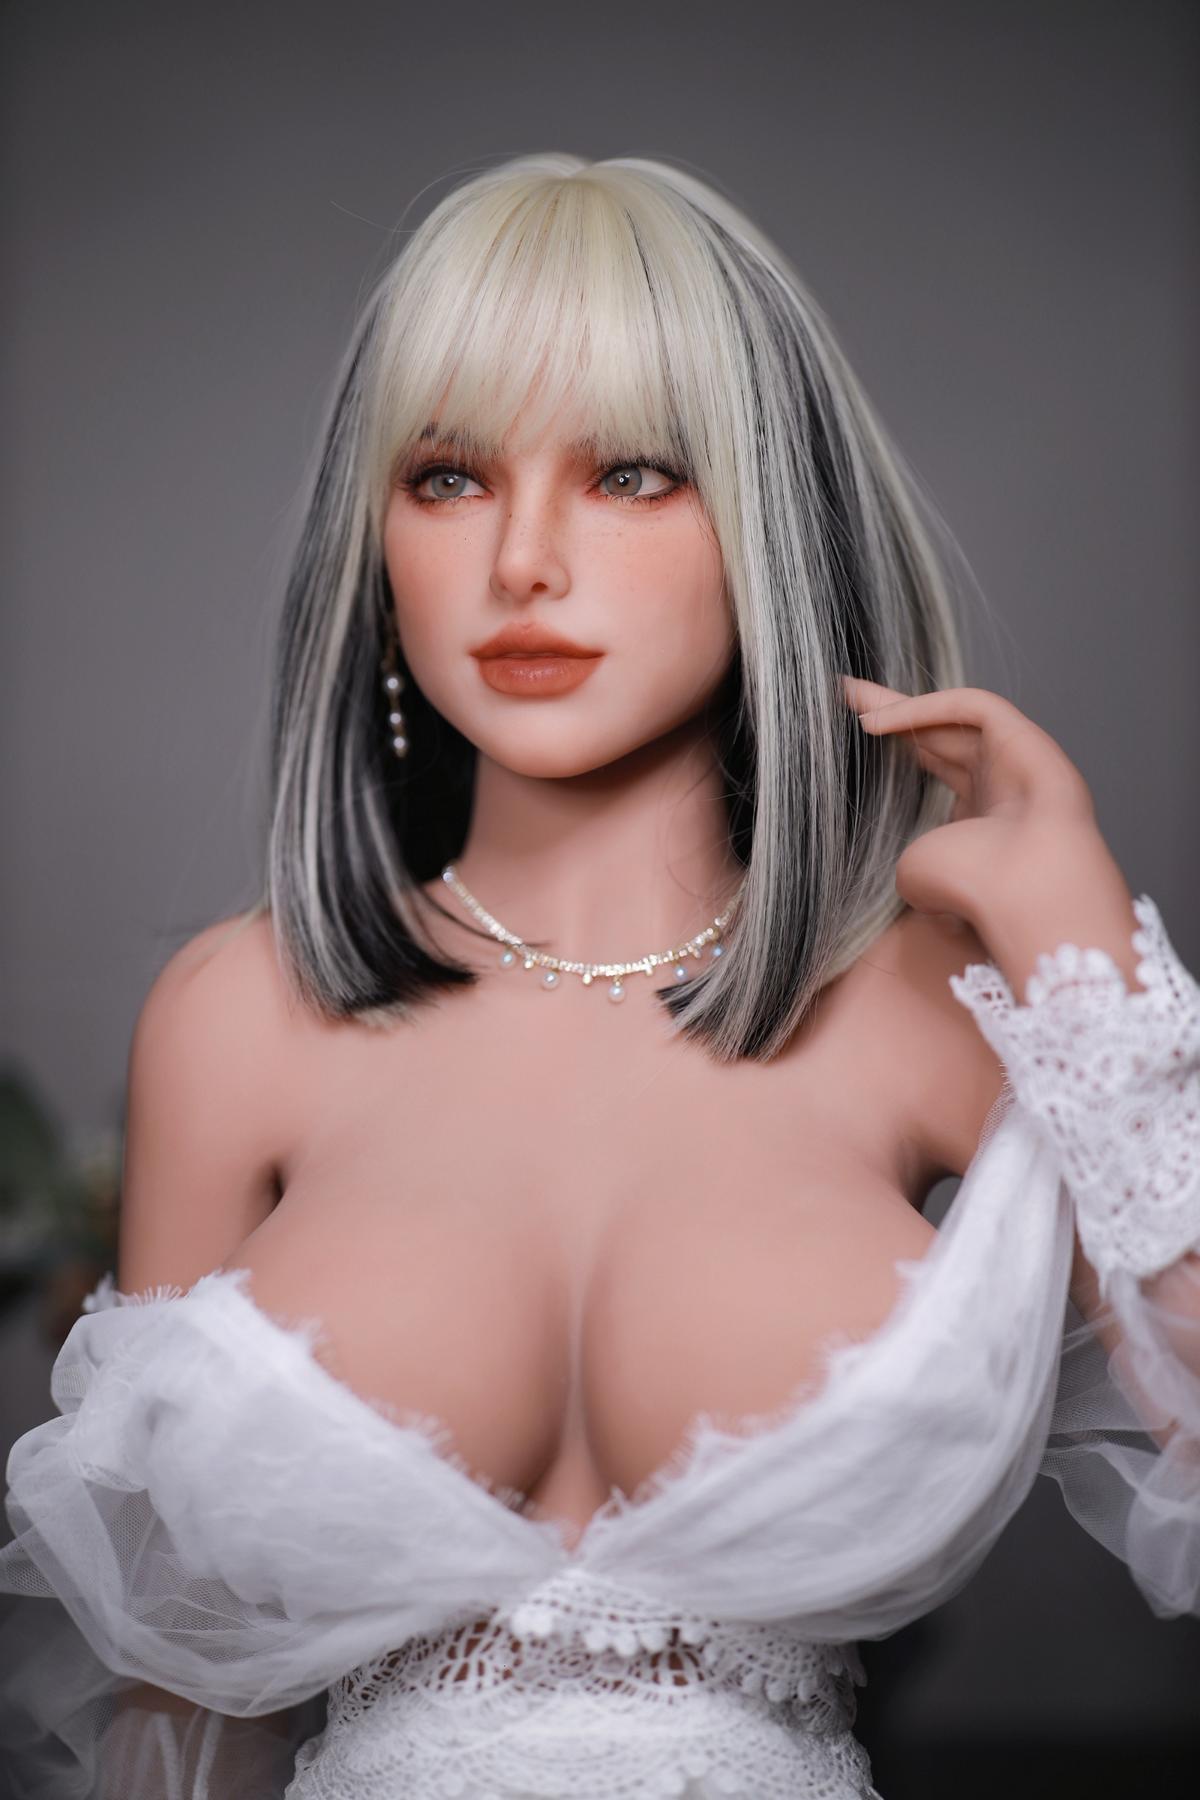 Goedkope Sexdoll Holly | Best Seller Real Doll